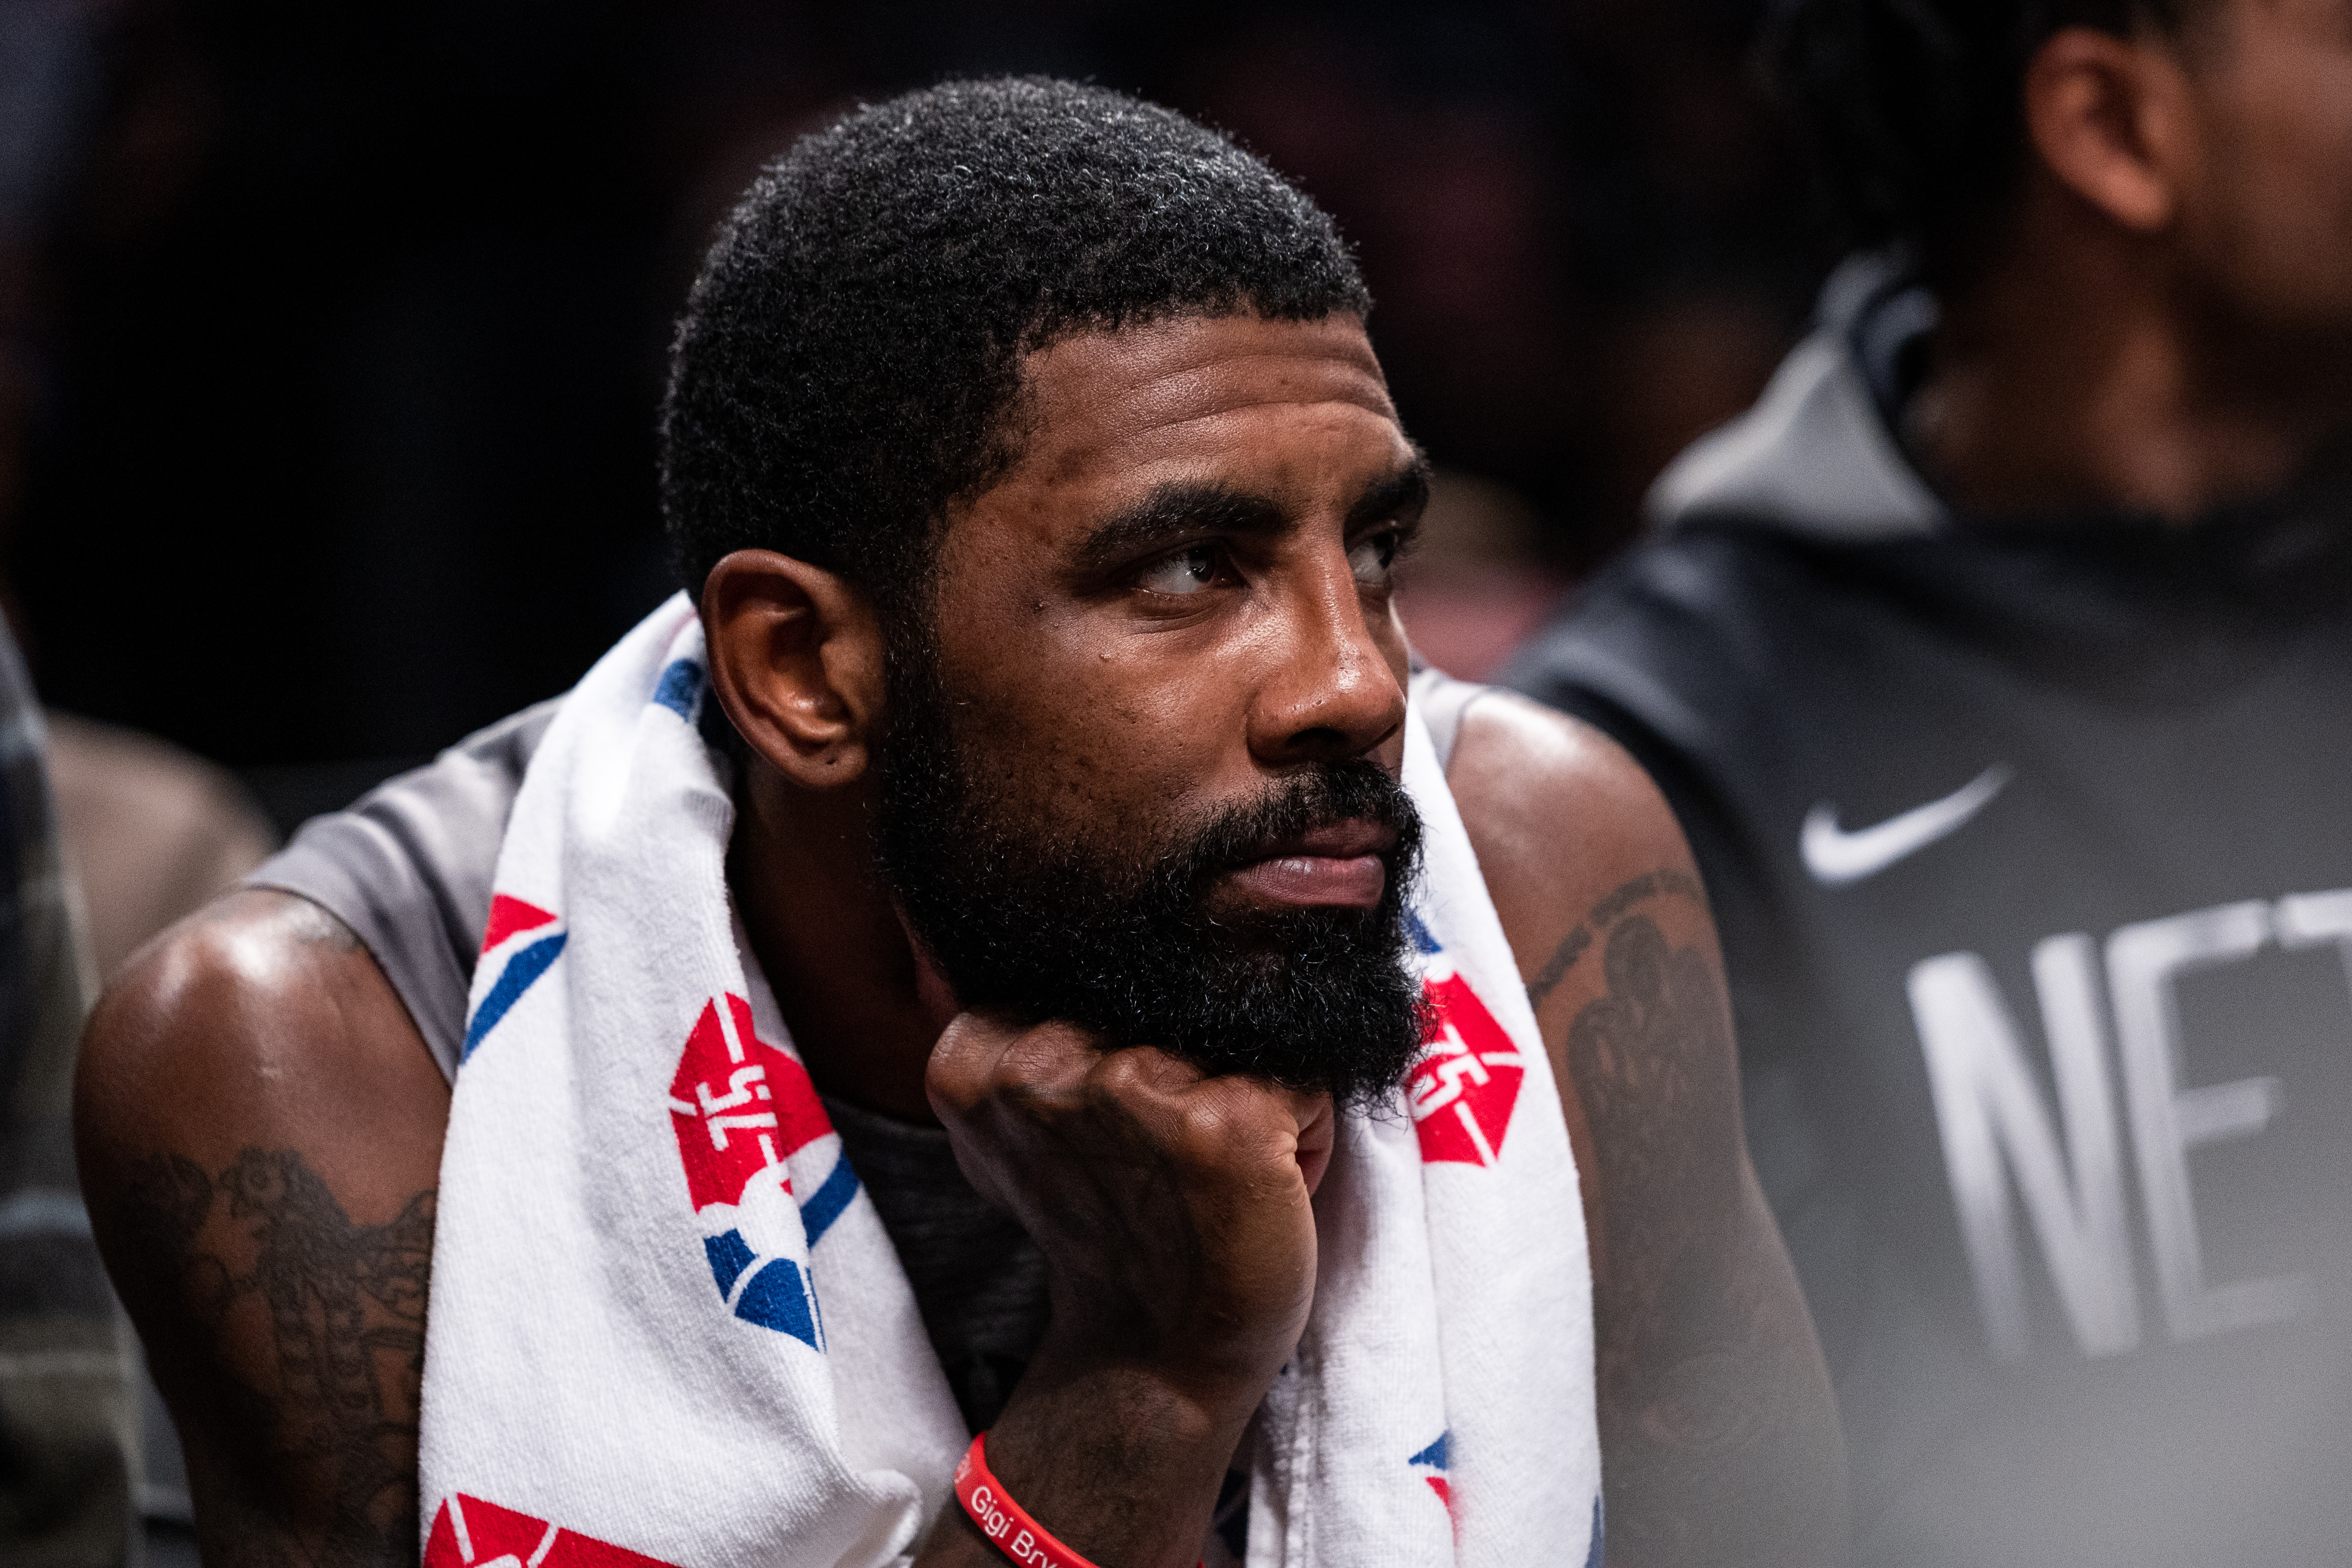 Brooklyn Nets end Kyrie Irving's suspension after he
apologizes for antisemitic post